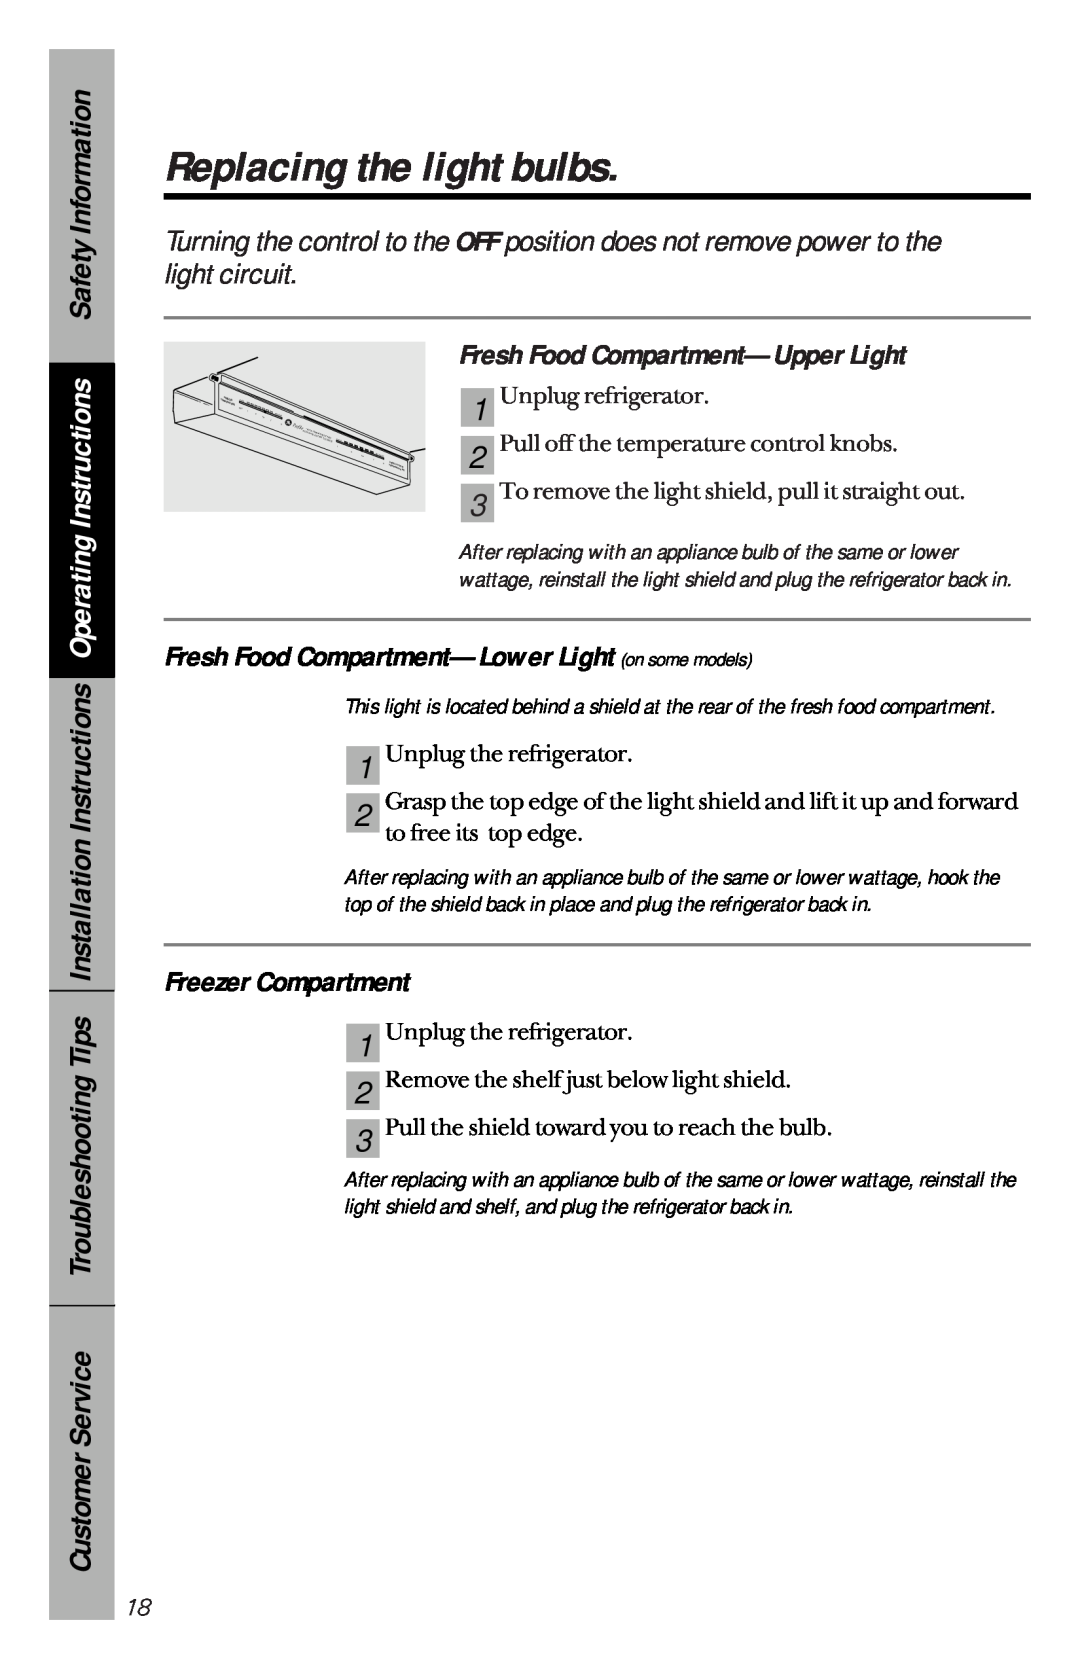 GE 162D3941P005 Replacing the light bulbs, Fresh Food Compartment—UpperLight, Freezer Compartment, Safety Information 